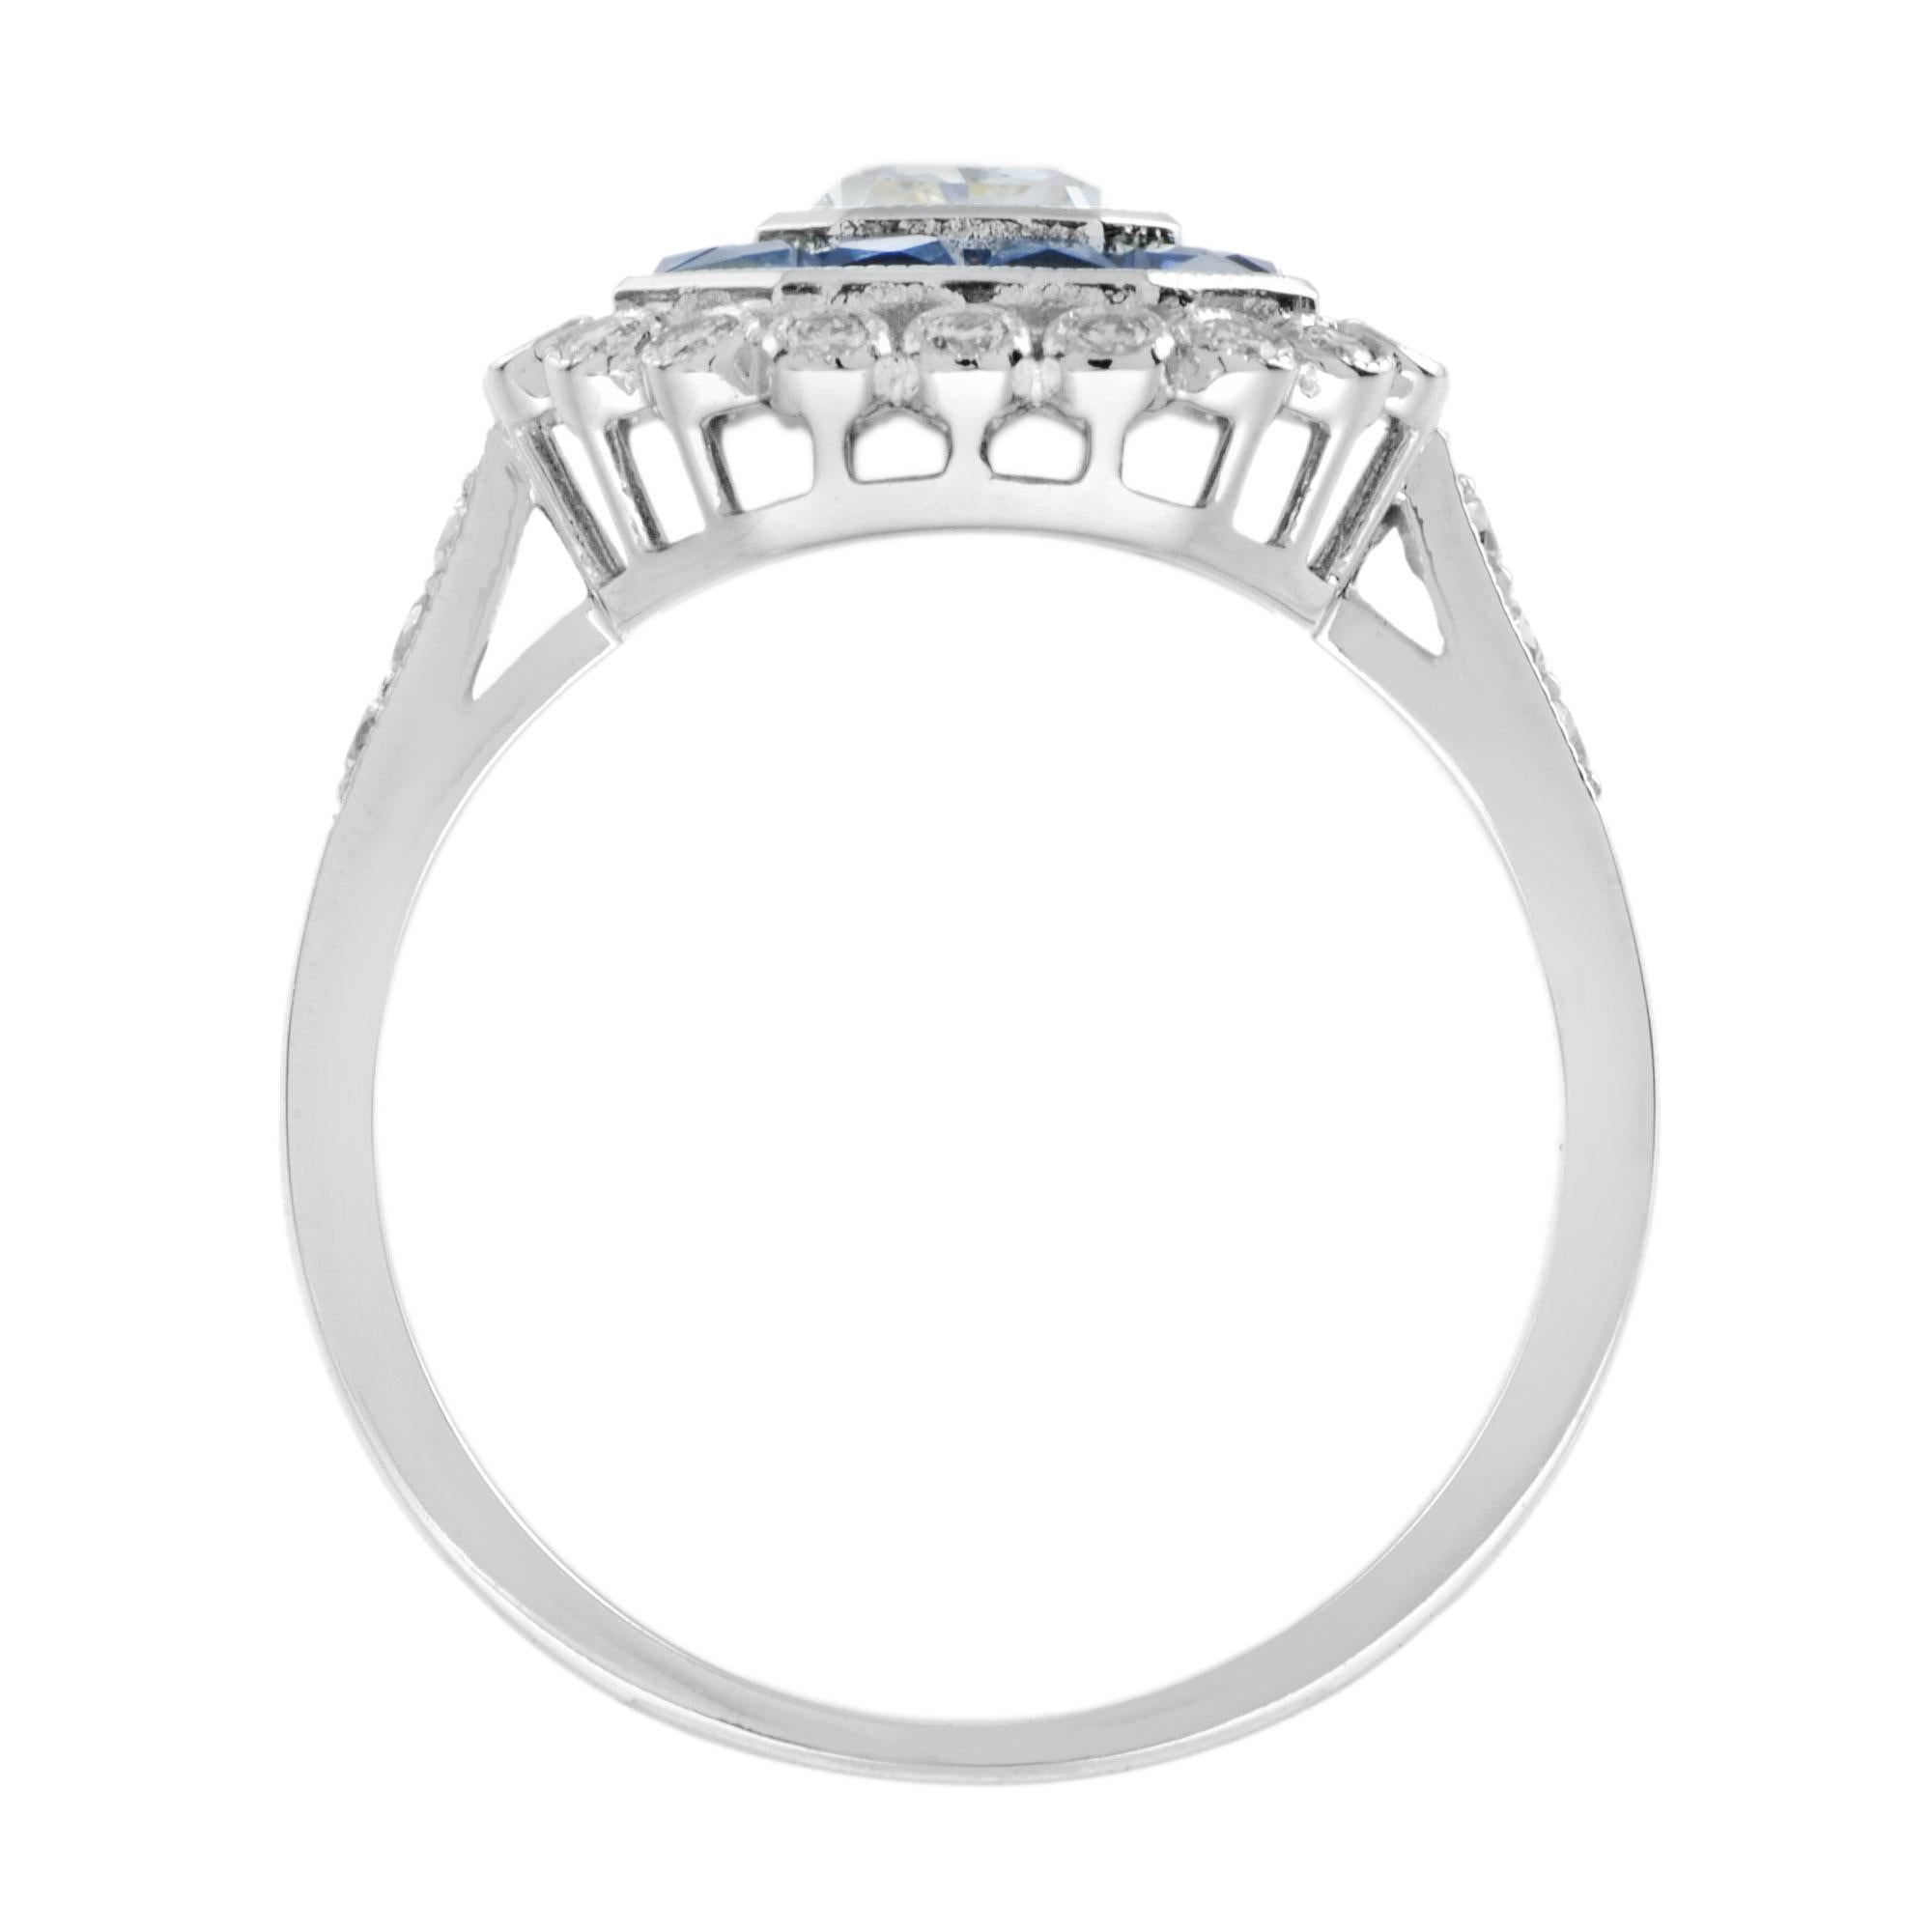 GIA 1.04 Ct. Diamond Sapphire Art Deco Style Engagement Ring in 18K White Gold For Sale 1